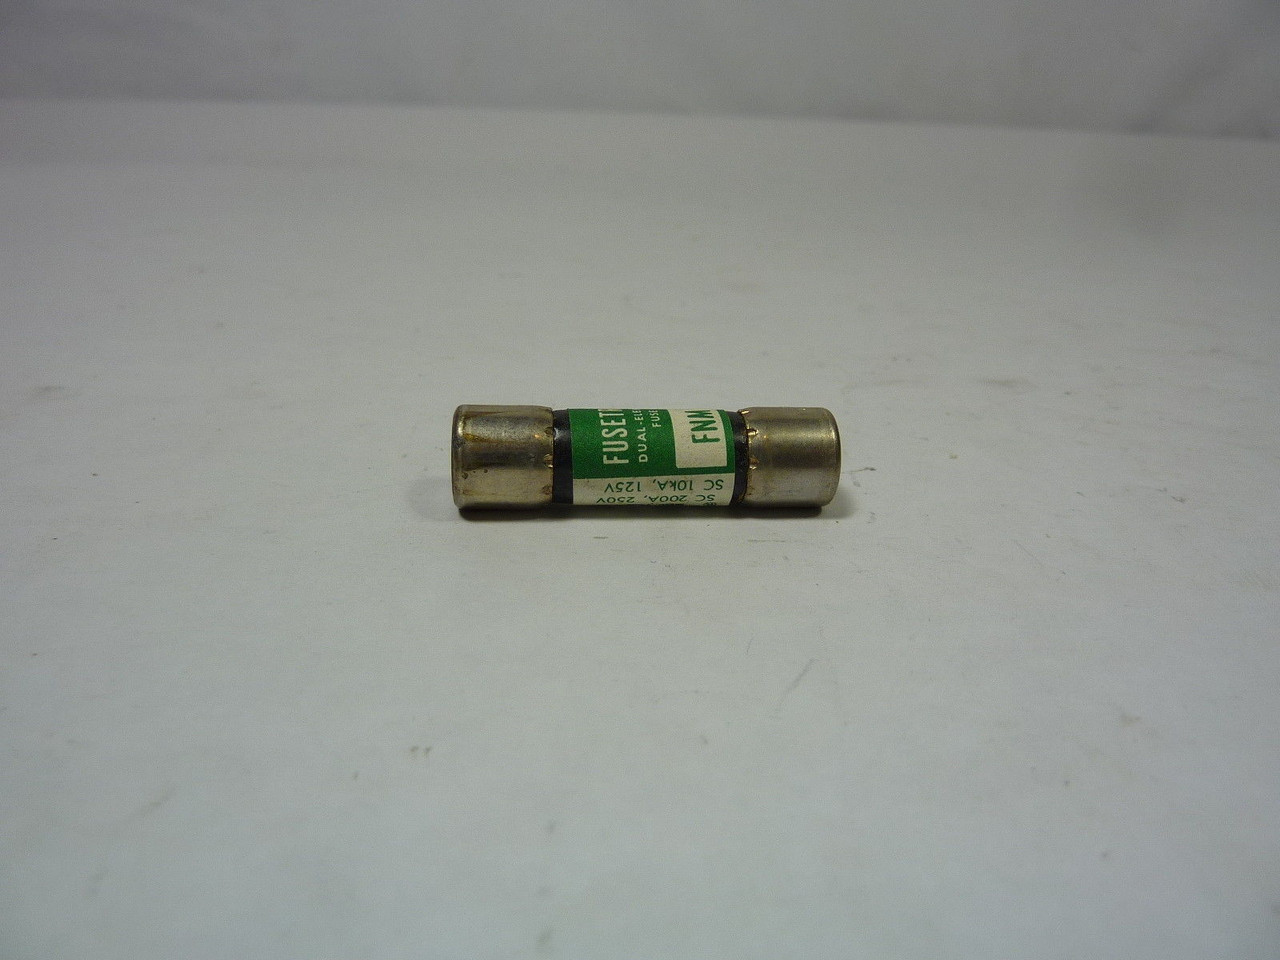 Fusetron FNM-4 Time Delay Fuse 4A 250V Lot of 10 USED